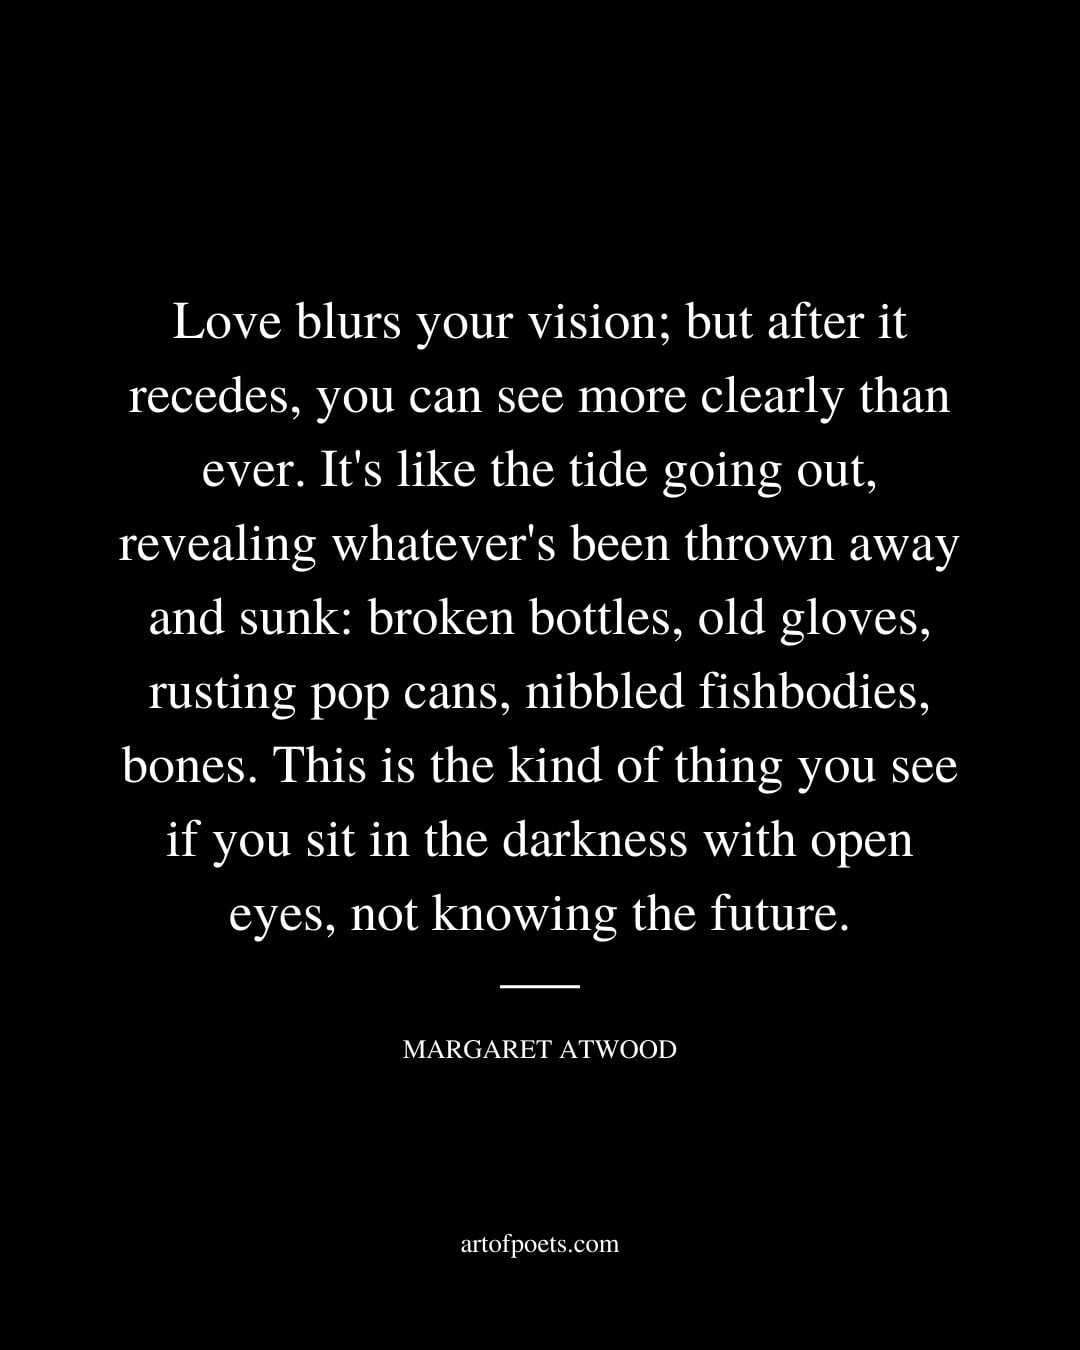 Love blurs your vision but after it recedes you can see more clearly than ever. Its like the tide going out revealing whatevers been thrown away and sunk